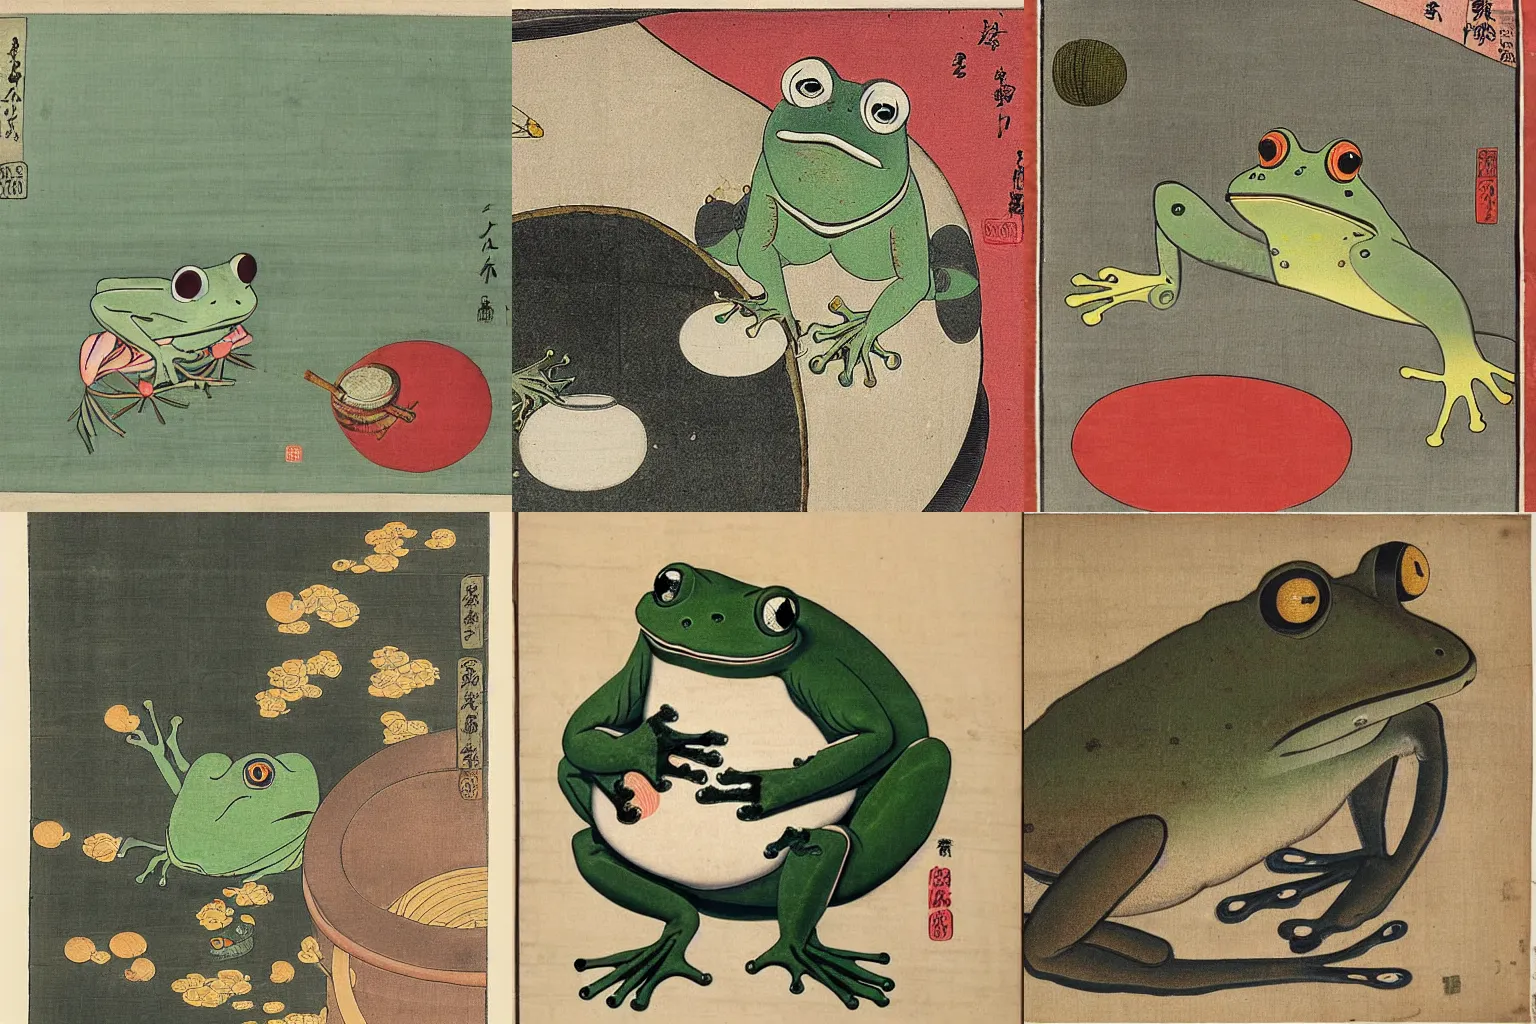 Prompt: The Wednesday Frog, Itō Jakuchu, 1790, hanging out with orbs, drums